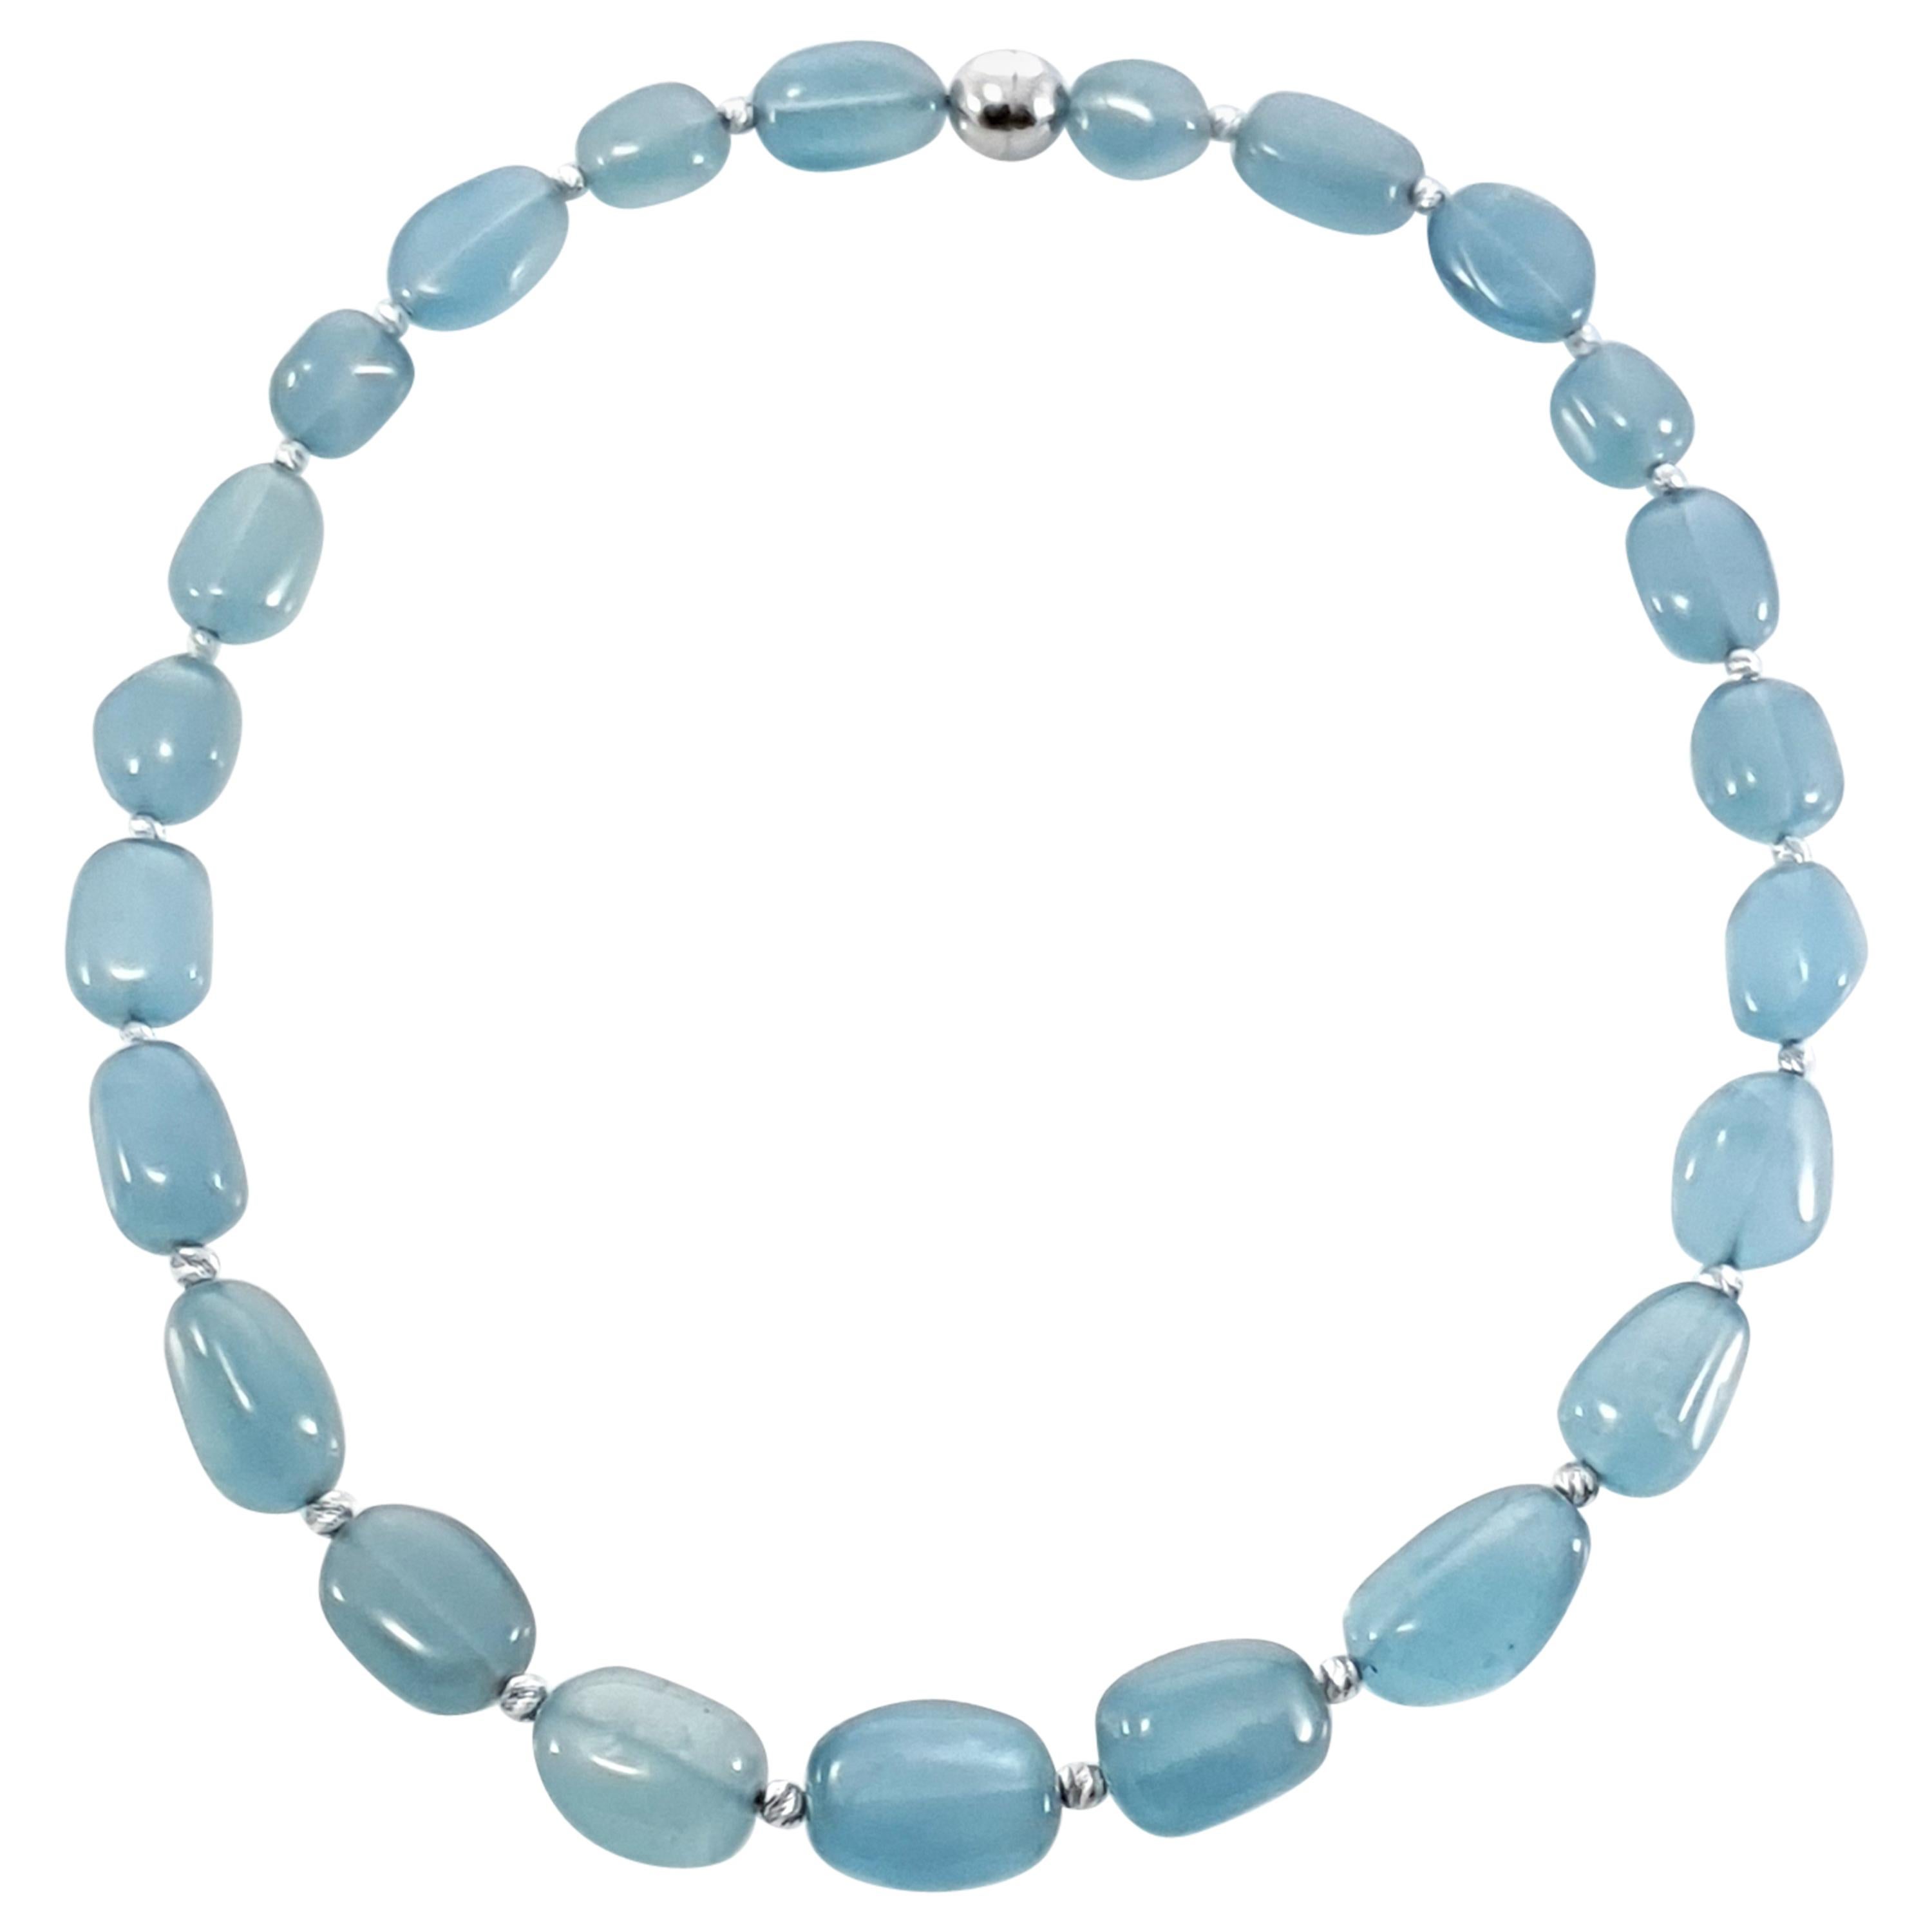 Milky Blue Aquamarine Baroque Beaded Necklace with 18kt White Gold